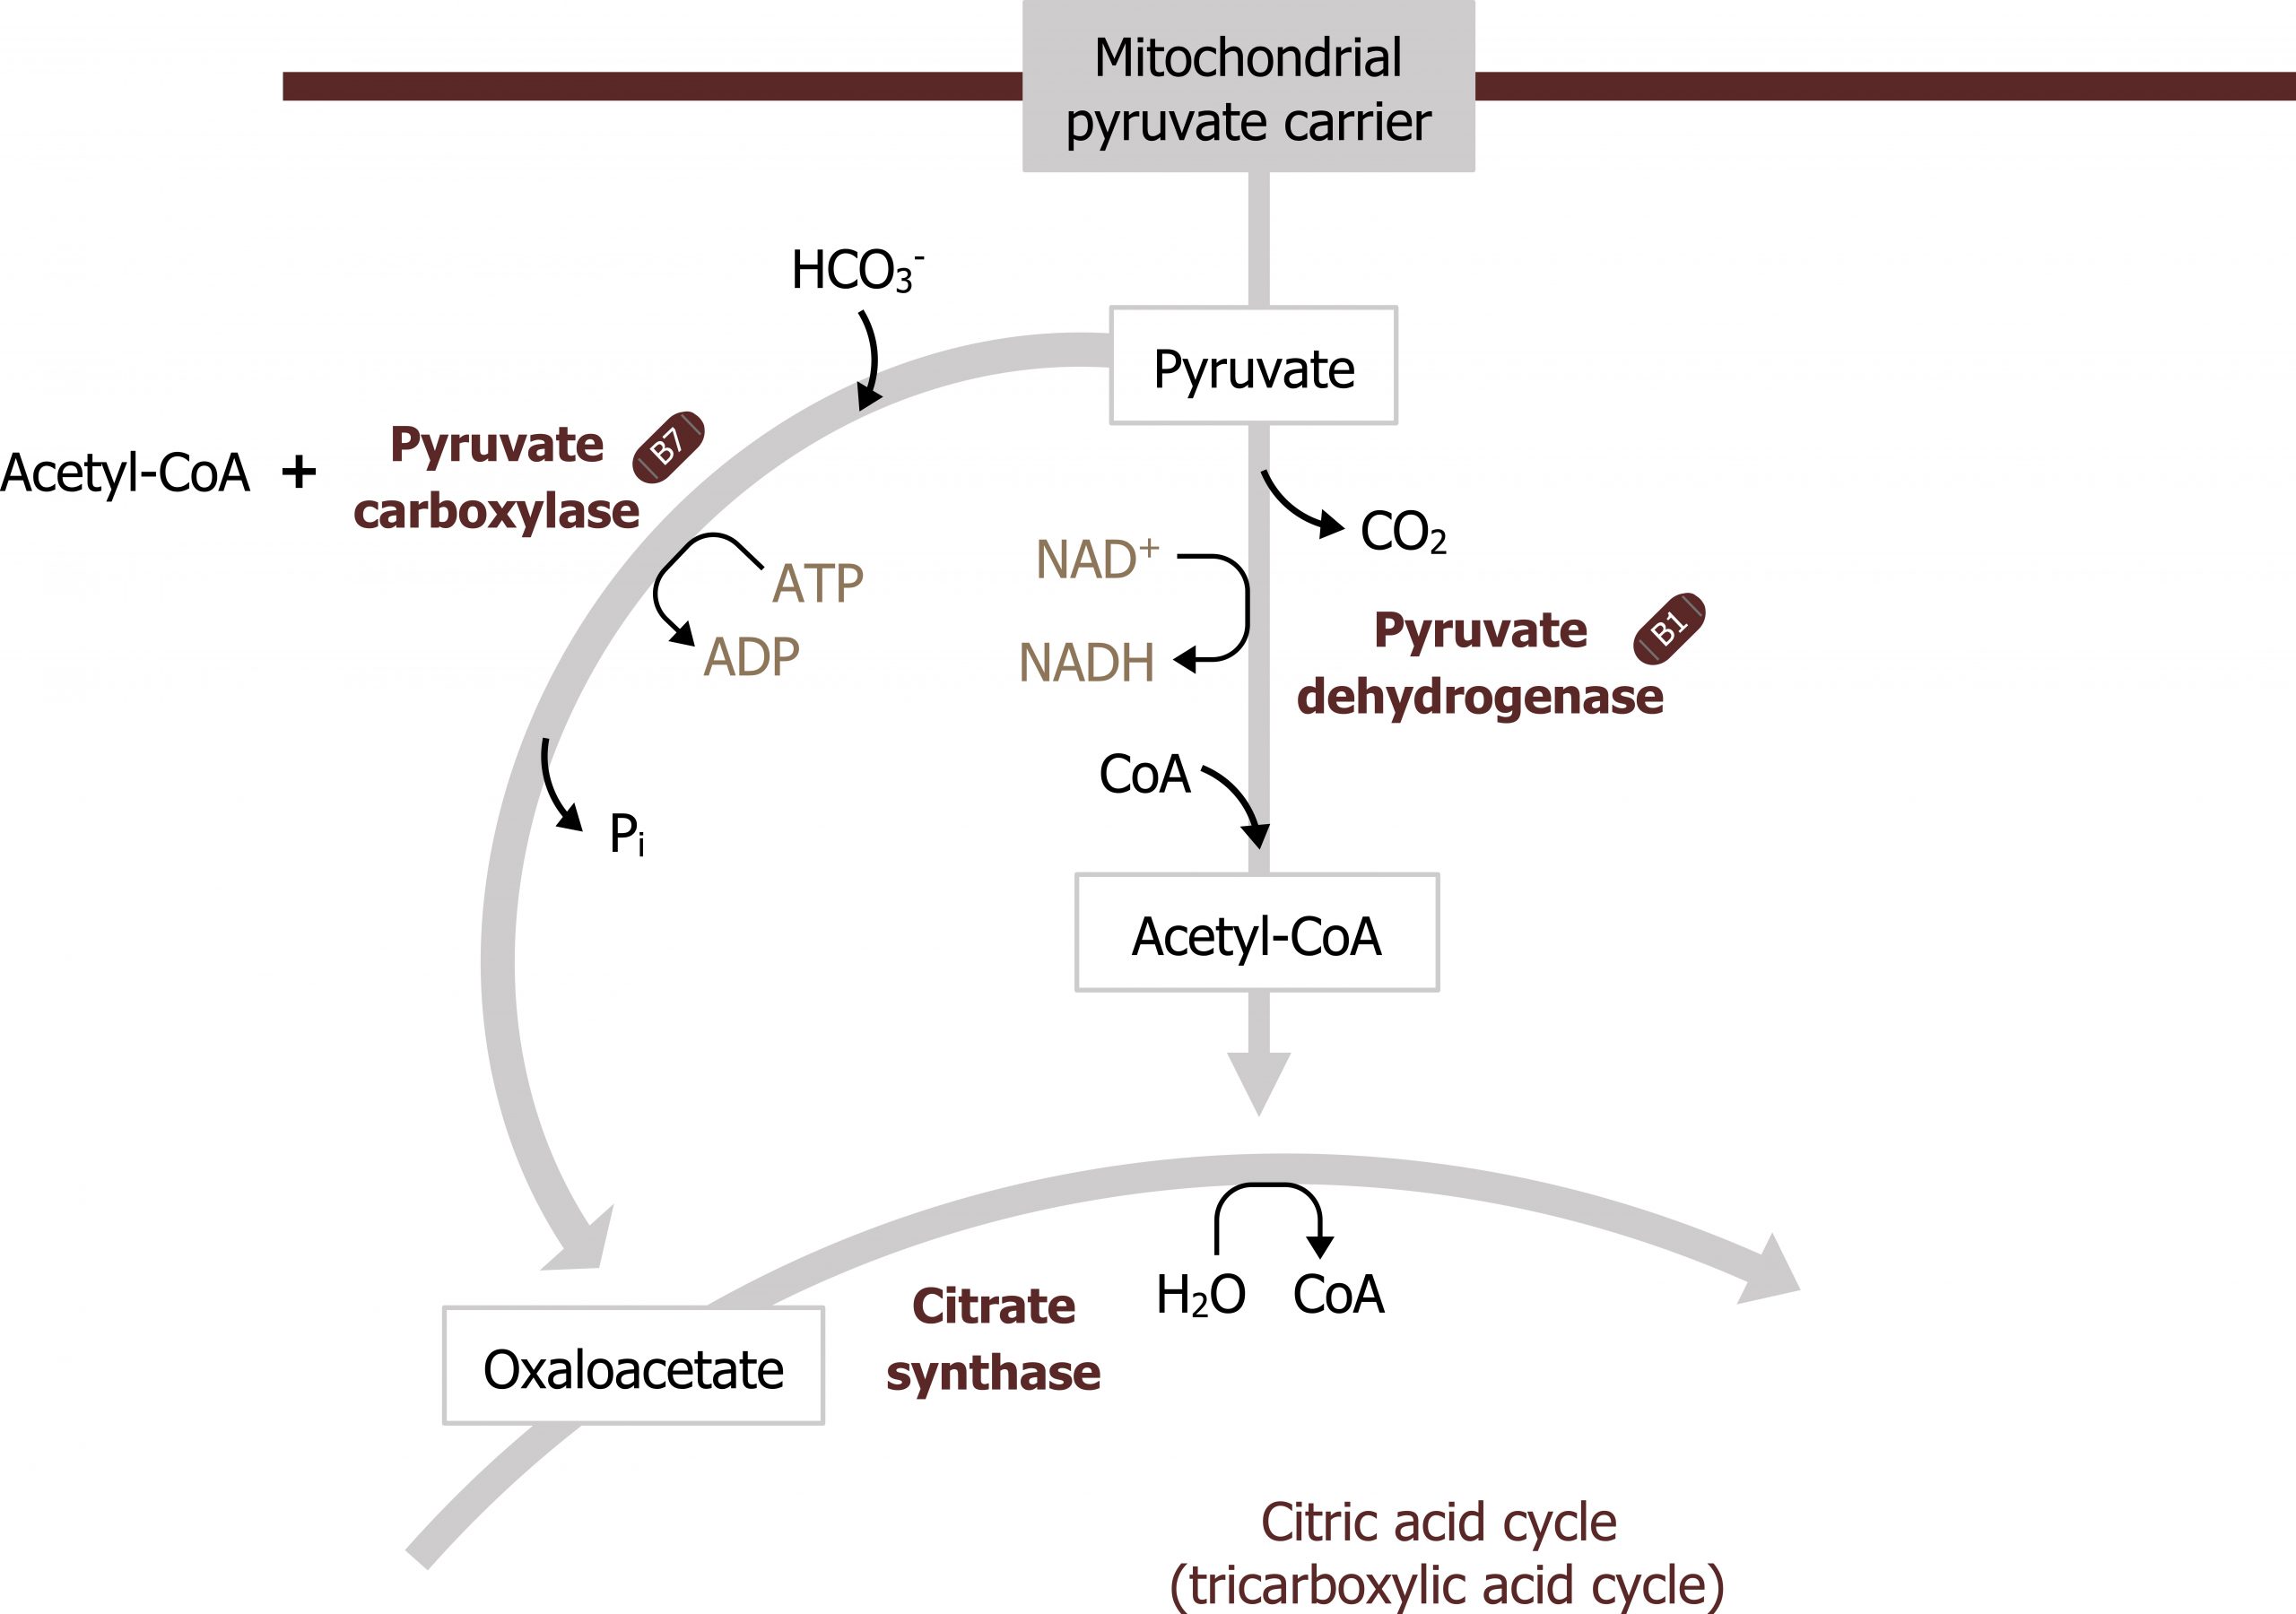 Mitochondrial pyruvate carrier arrow to pyruvate arrow with enzyme pyruvate dehydrogenase and NAD+ arrow NADH, loss of CO2, addition of CoA to acetyl coA arrow into the citric acid cycle. Pyruvate arrow with enzyme pyruvate carboxylase and ATP arrow ADP, addition of HCO3-, loss of Pi to oxaloacetate in the citric acid cycle. Oxaloacetate arrow with enzyme citrate synthase and H2O arrow CoA to acetyl CoA entry point. Acetyl-CoA excites pyruvate carboxylase.